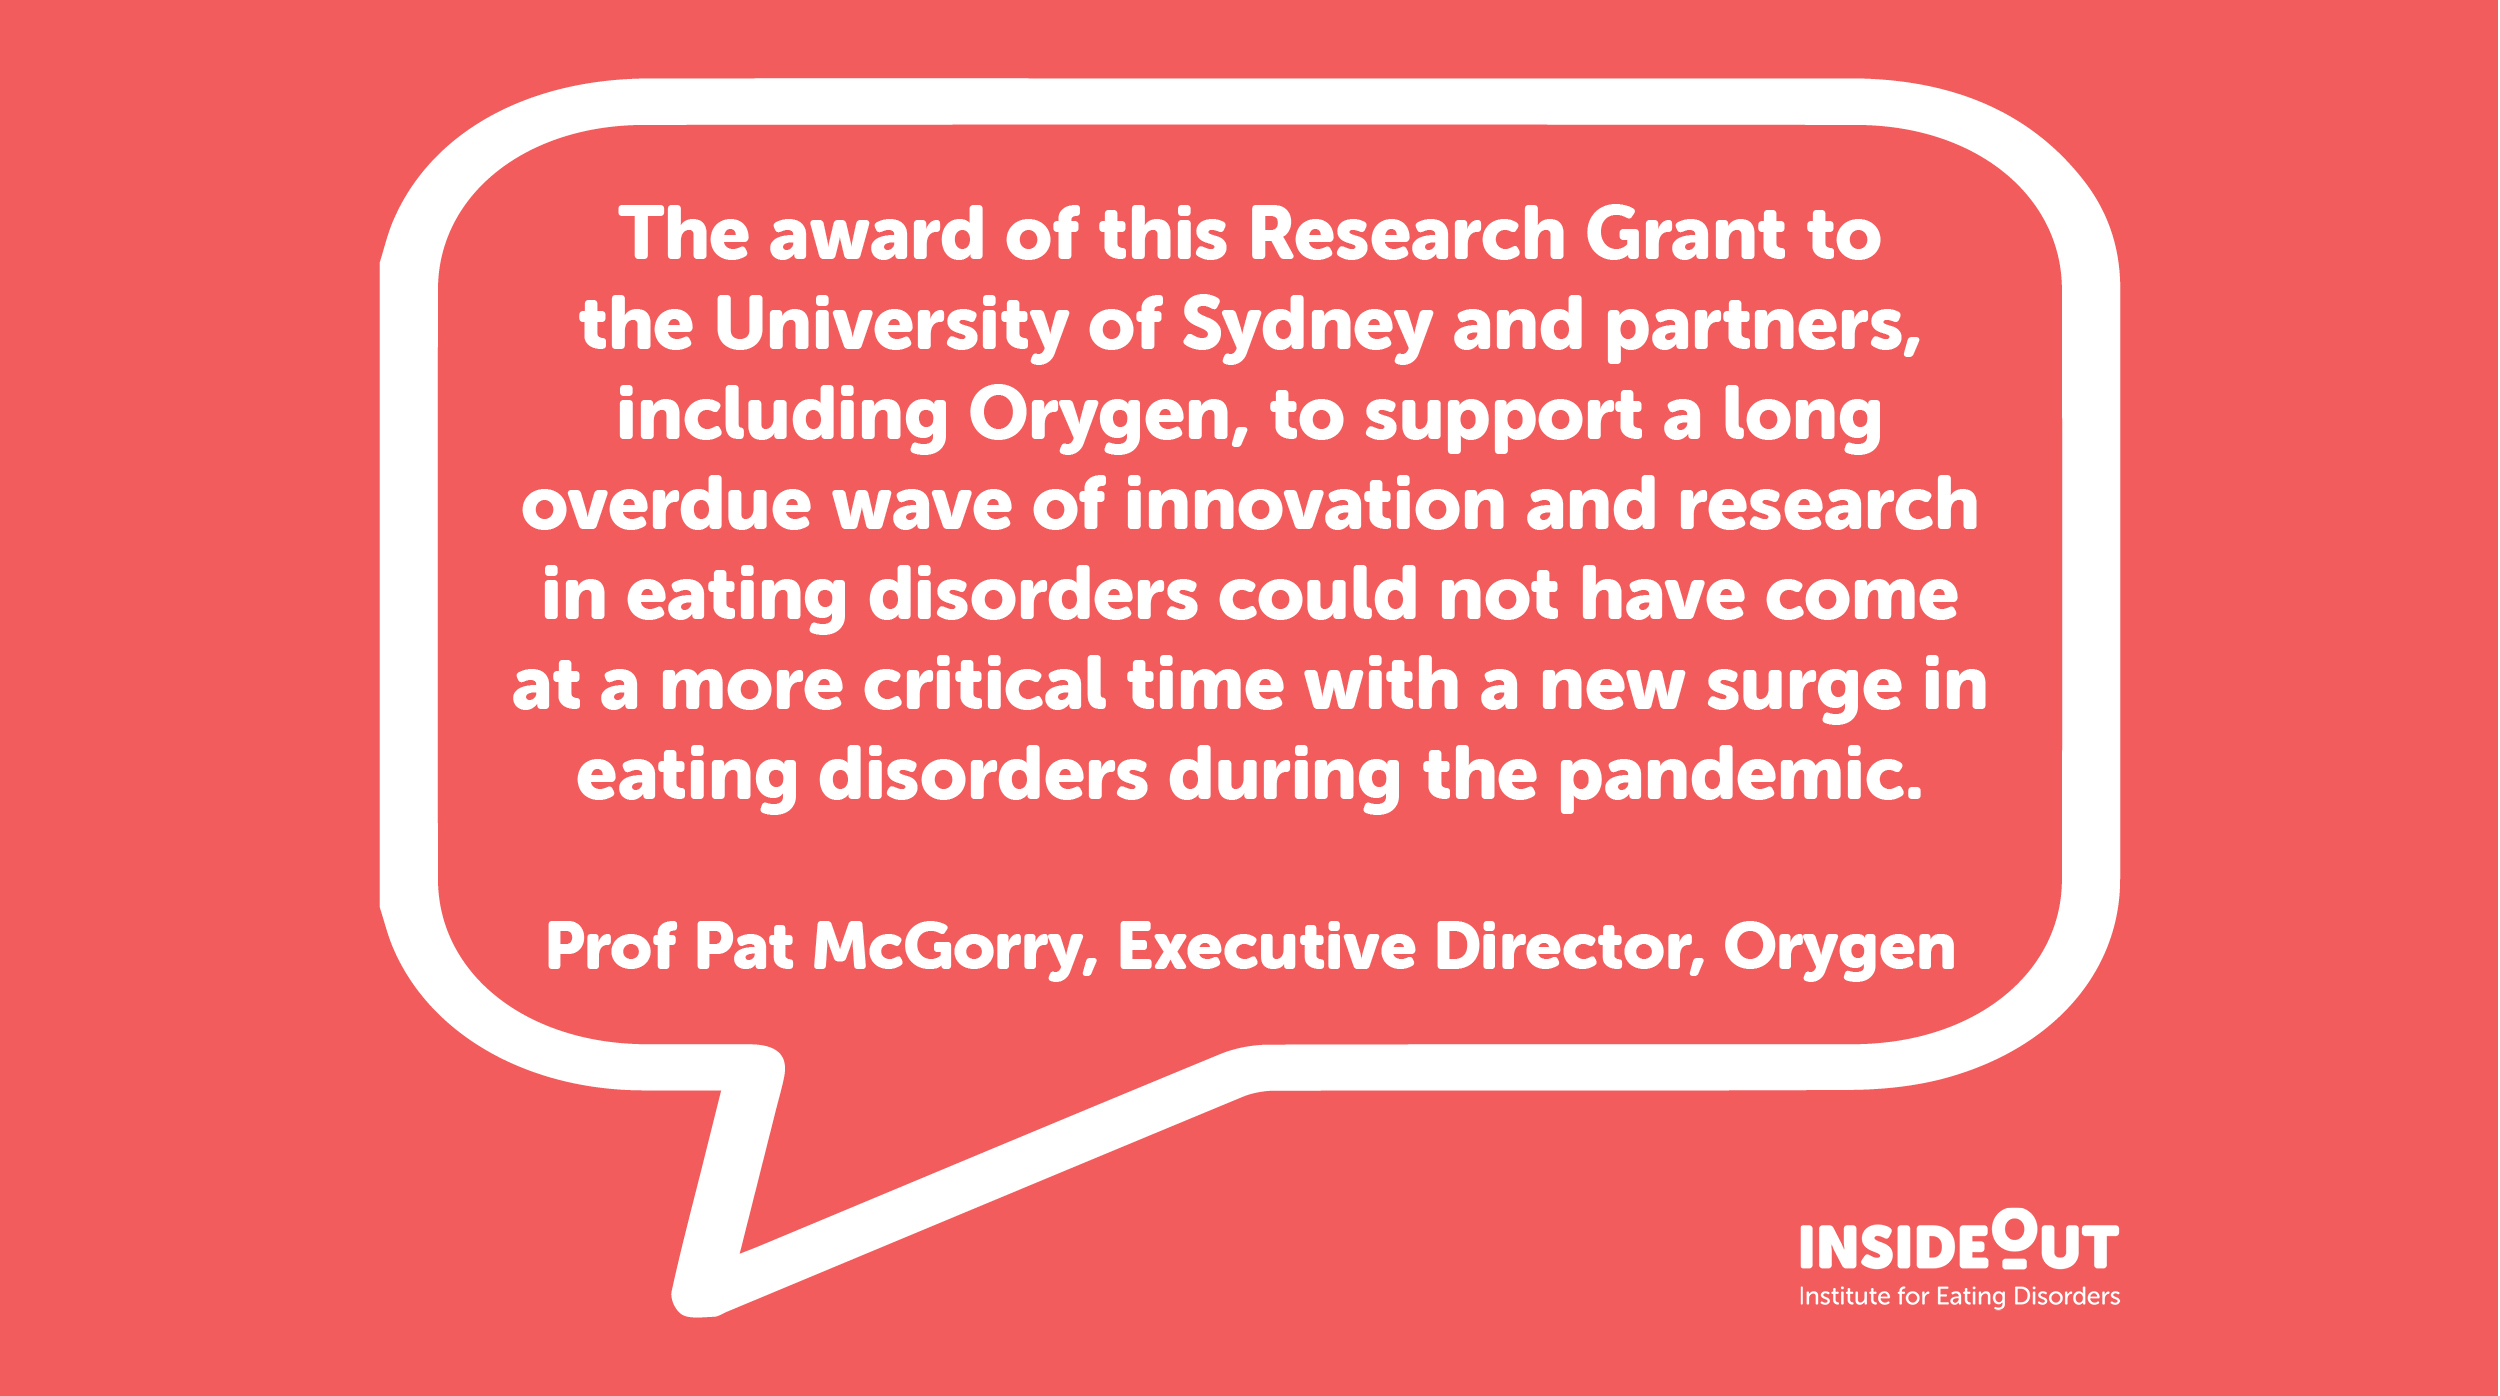 Professor Pat McGorry, Executive Director of Orygen said, "The award of this Research Grant to the University of Sydney and partners, including Orygen, to support a long overdue wave of innovation and research in eating disorders could not have come at a more critical time with a new surge in eating disorders during the pandemic."